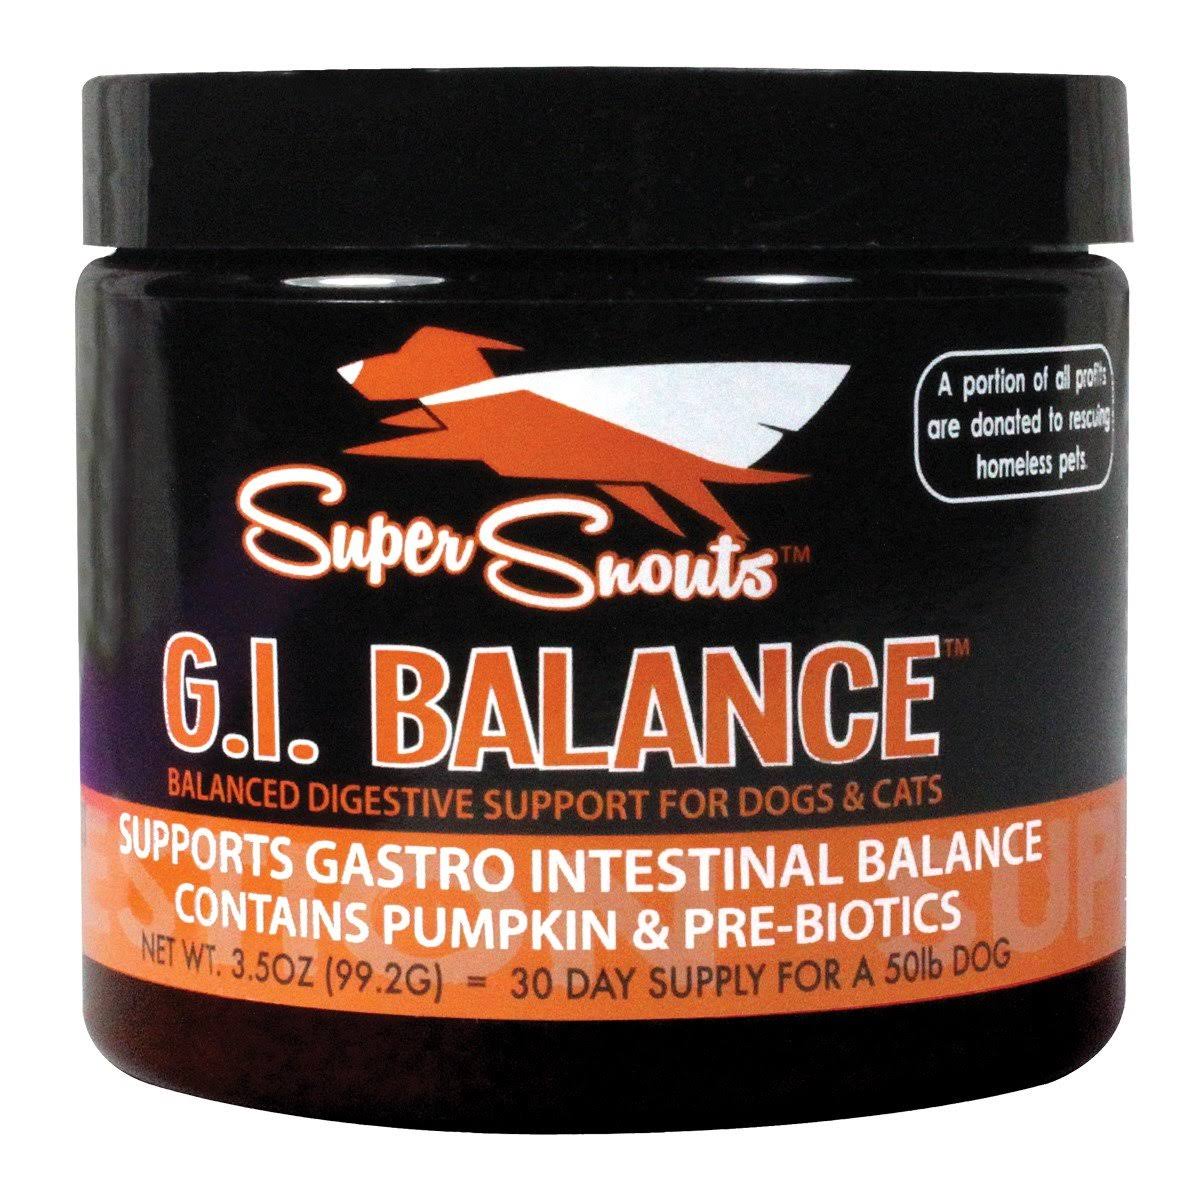 G.I. Balance Digestive Blend Supplement for Dogs and Cats - 88g